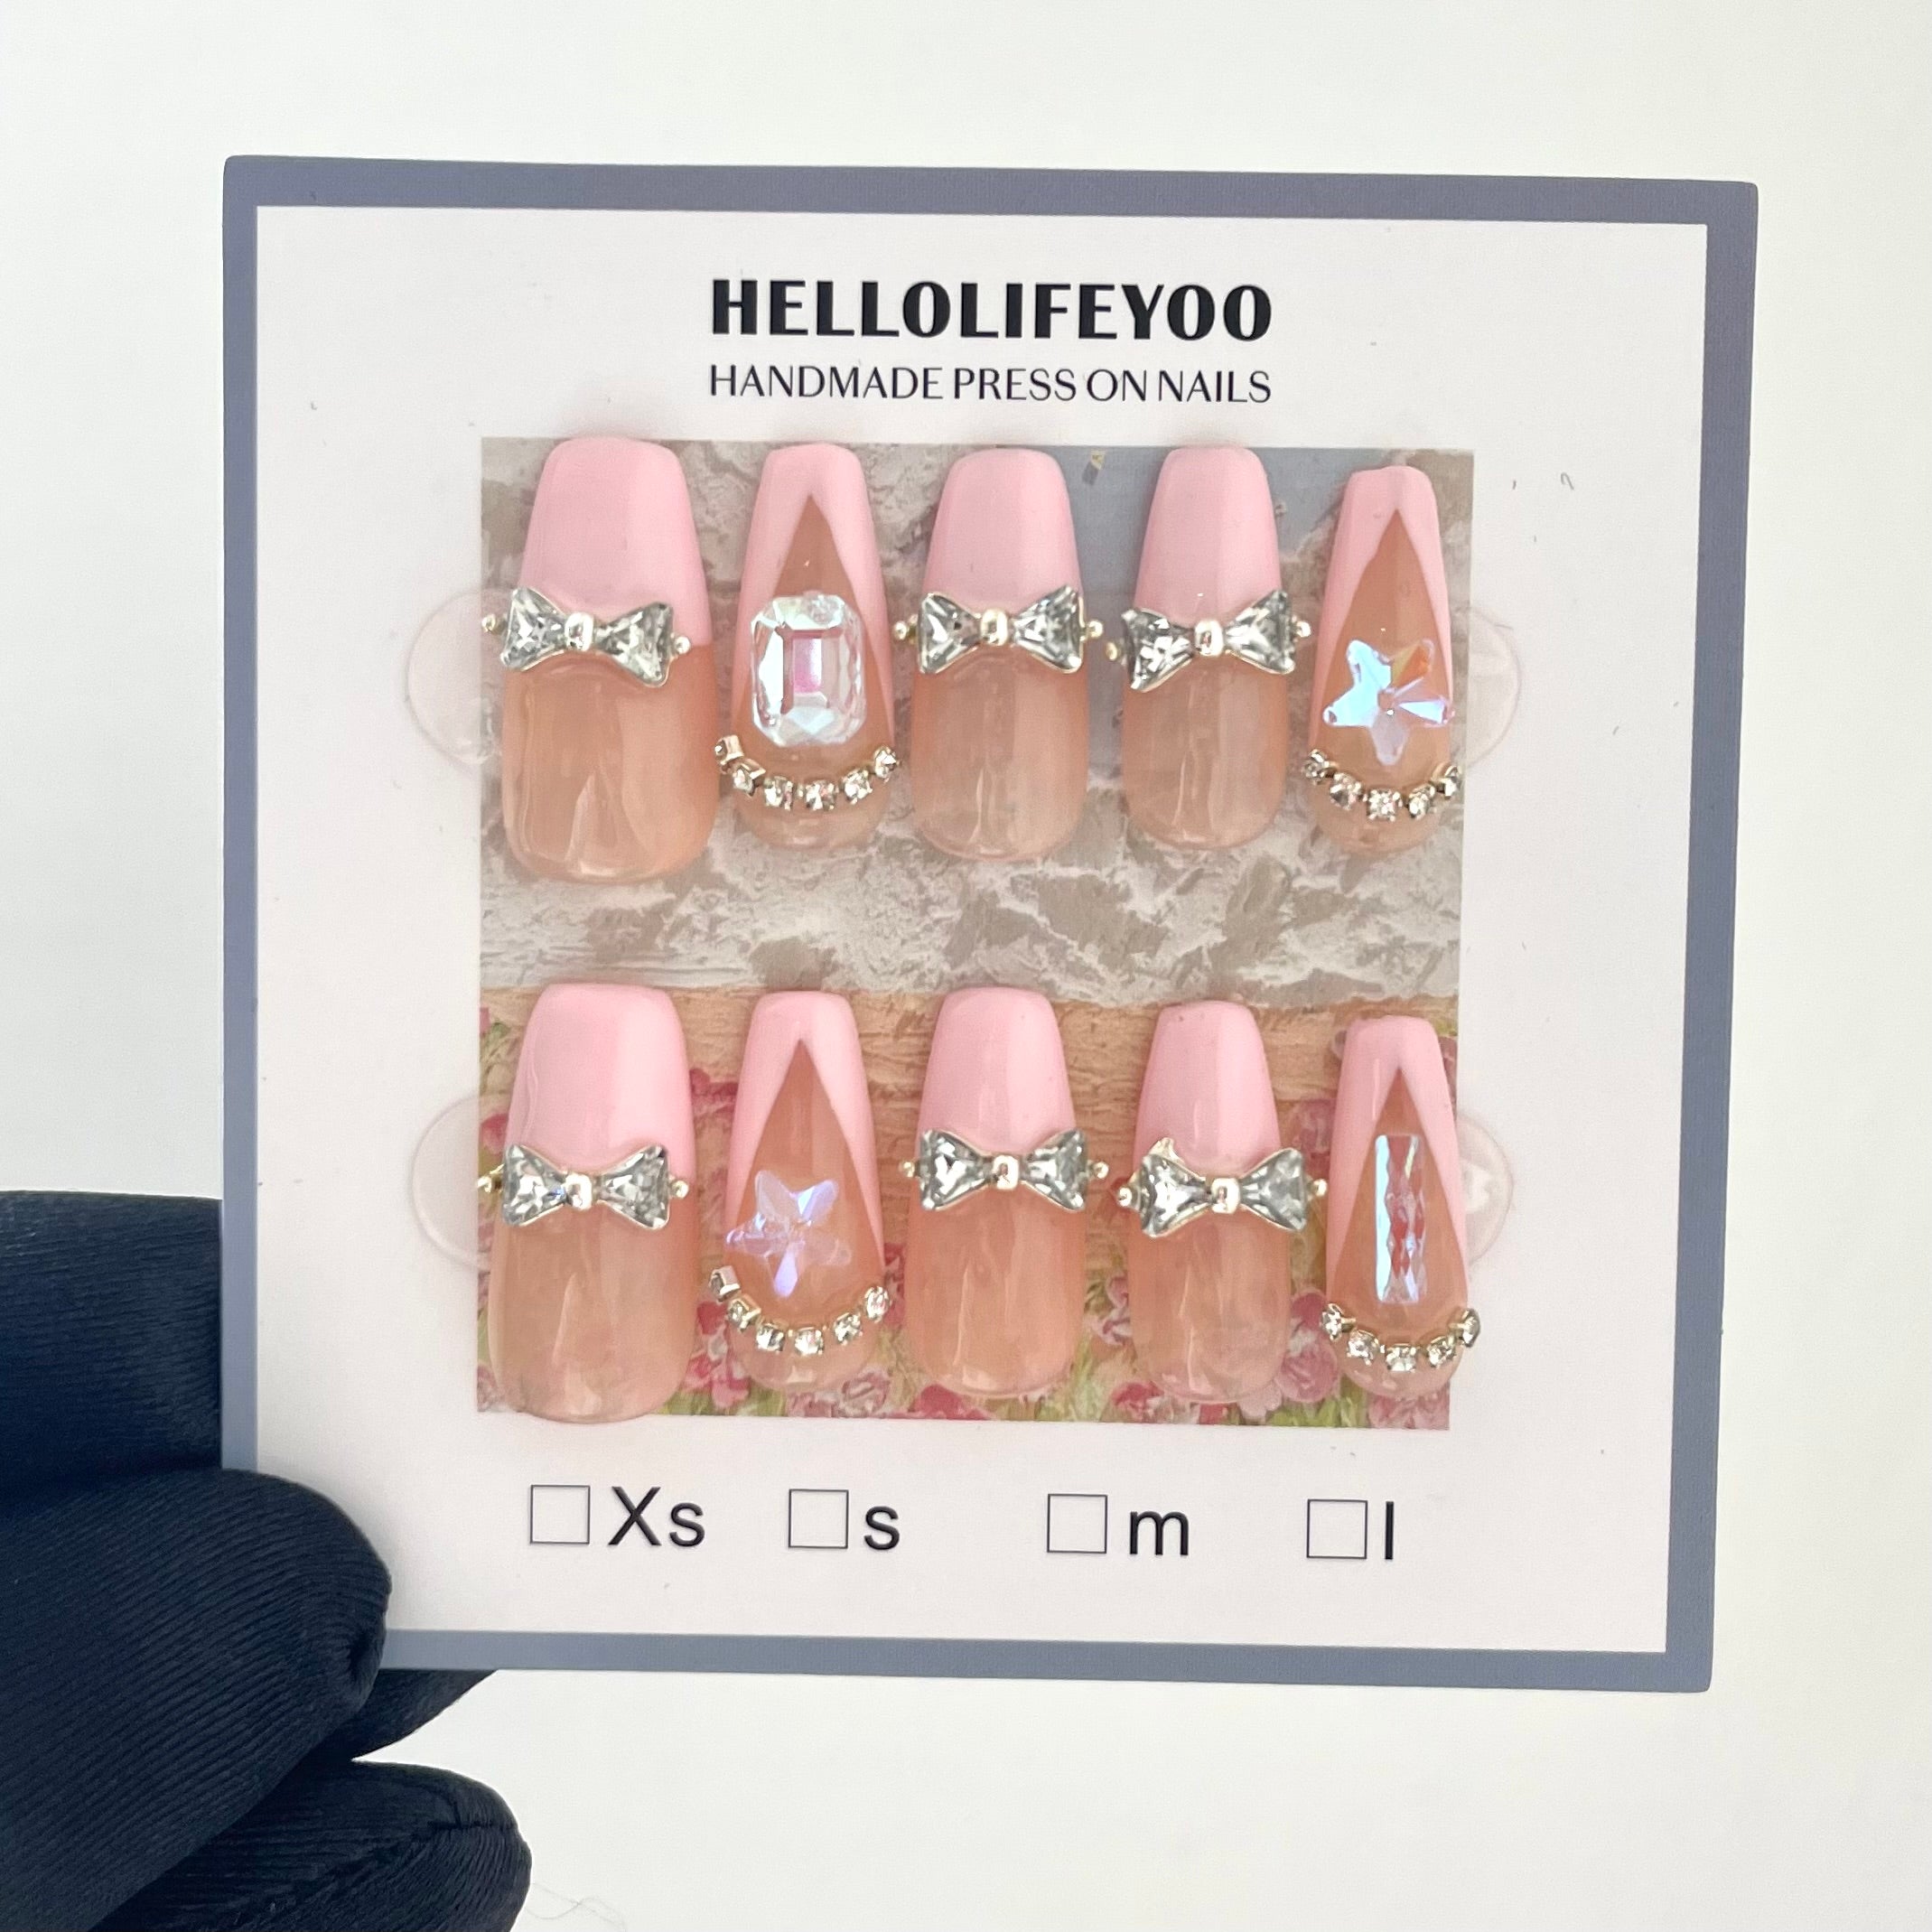 FAIRY TALE- TEN PIECES OF HANDCRAFTED PRESS ON NAIL